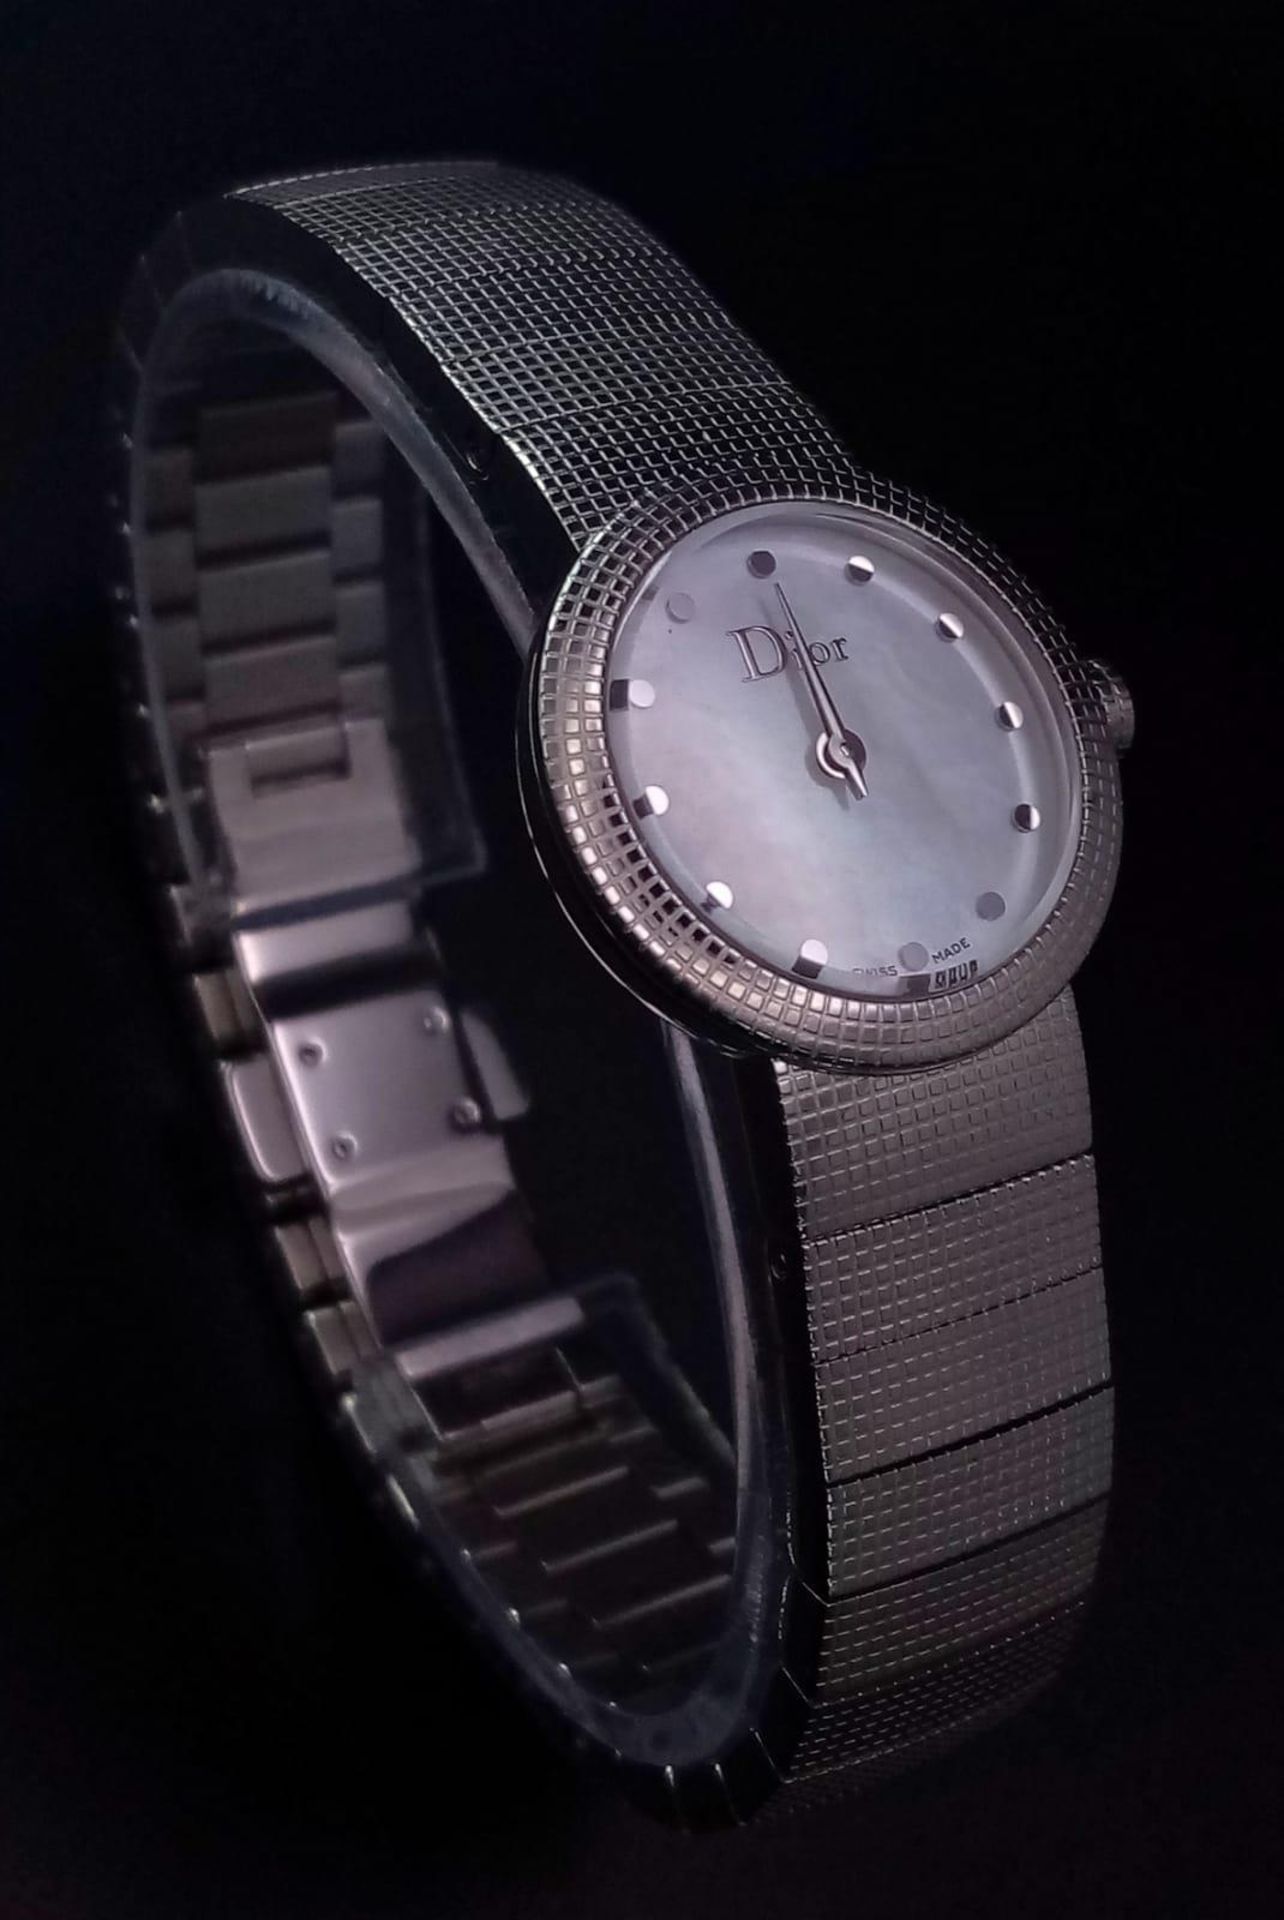 A Designer Christian Dior Quartz Ladies Watch. Stainless steel bracelet and case - 23mm. White dial. - Image 3 of 10